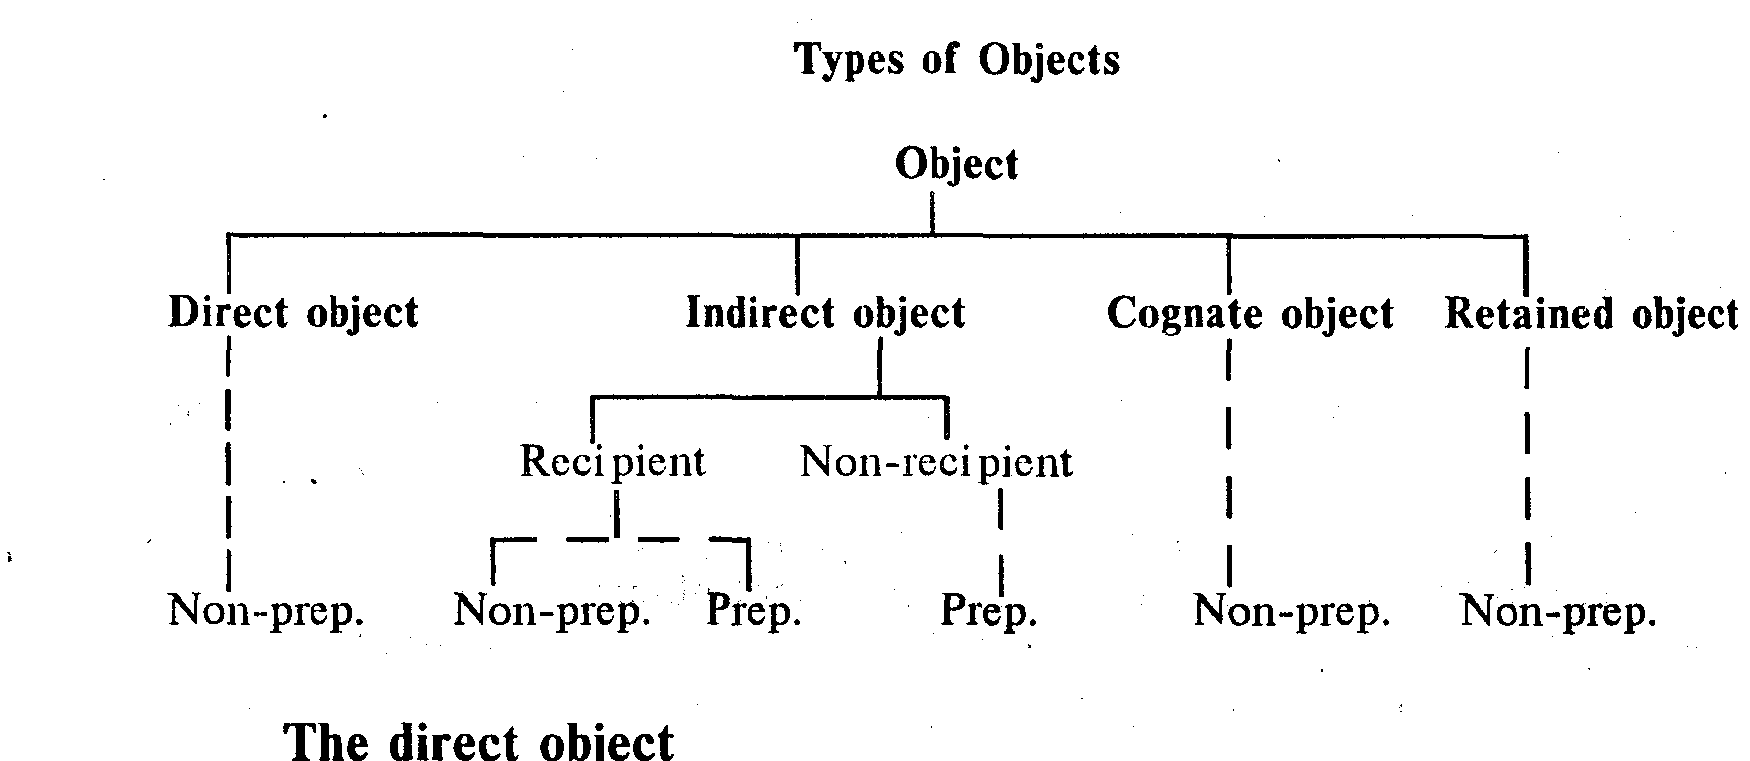 Object expression. Types of objects in English. Types of objects in English Grammar. Object в грамматике английского. Object direct indirect cognate.